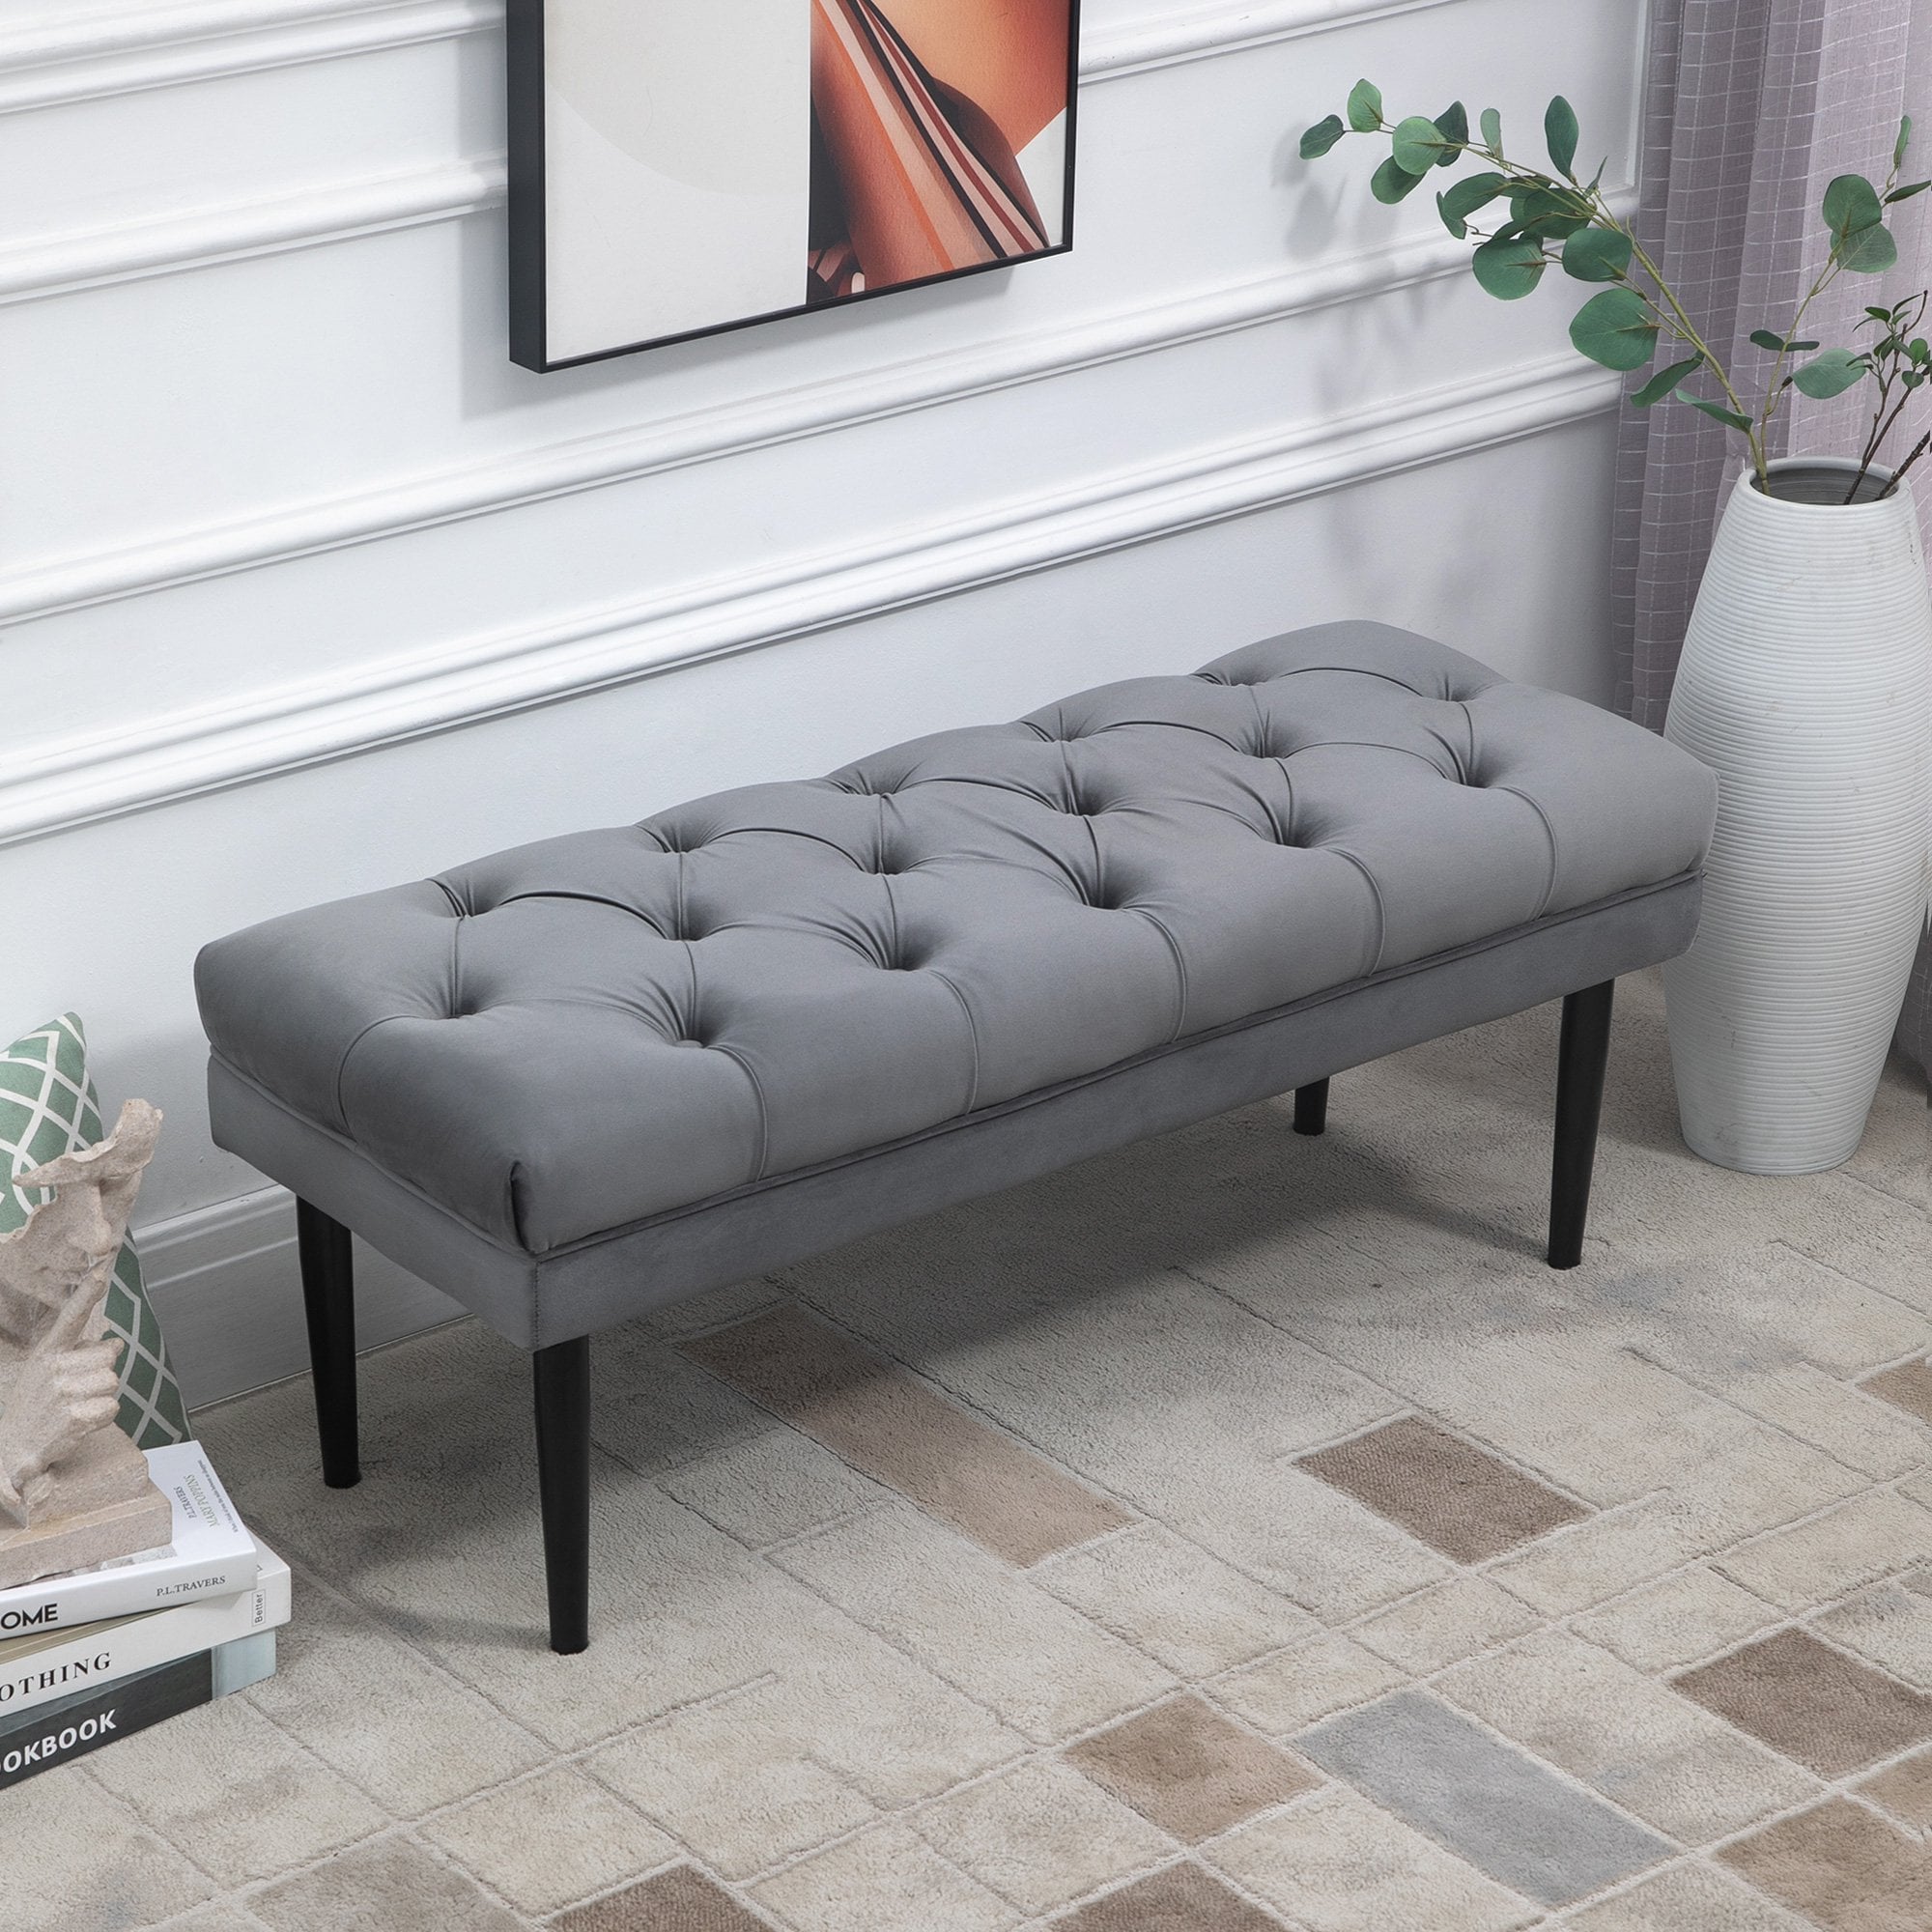 Entryway Bench - Bed End Bench - Button Tufted Window Seat - Upholstered Accent Stool for Living Room - Bedroom - Hallway - Grey Seat - Home Living  |